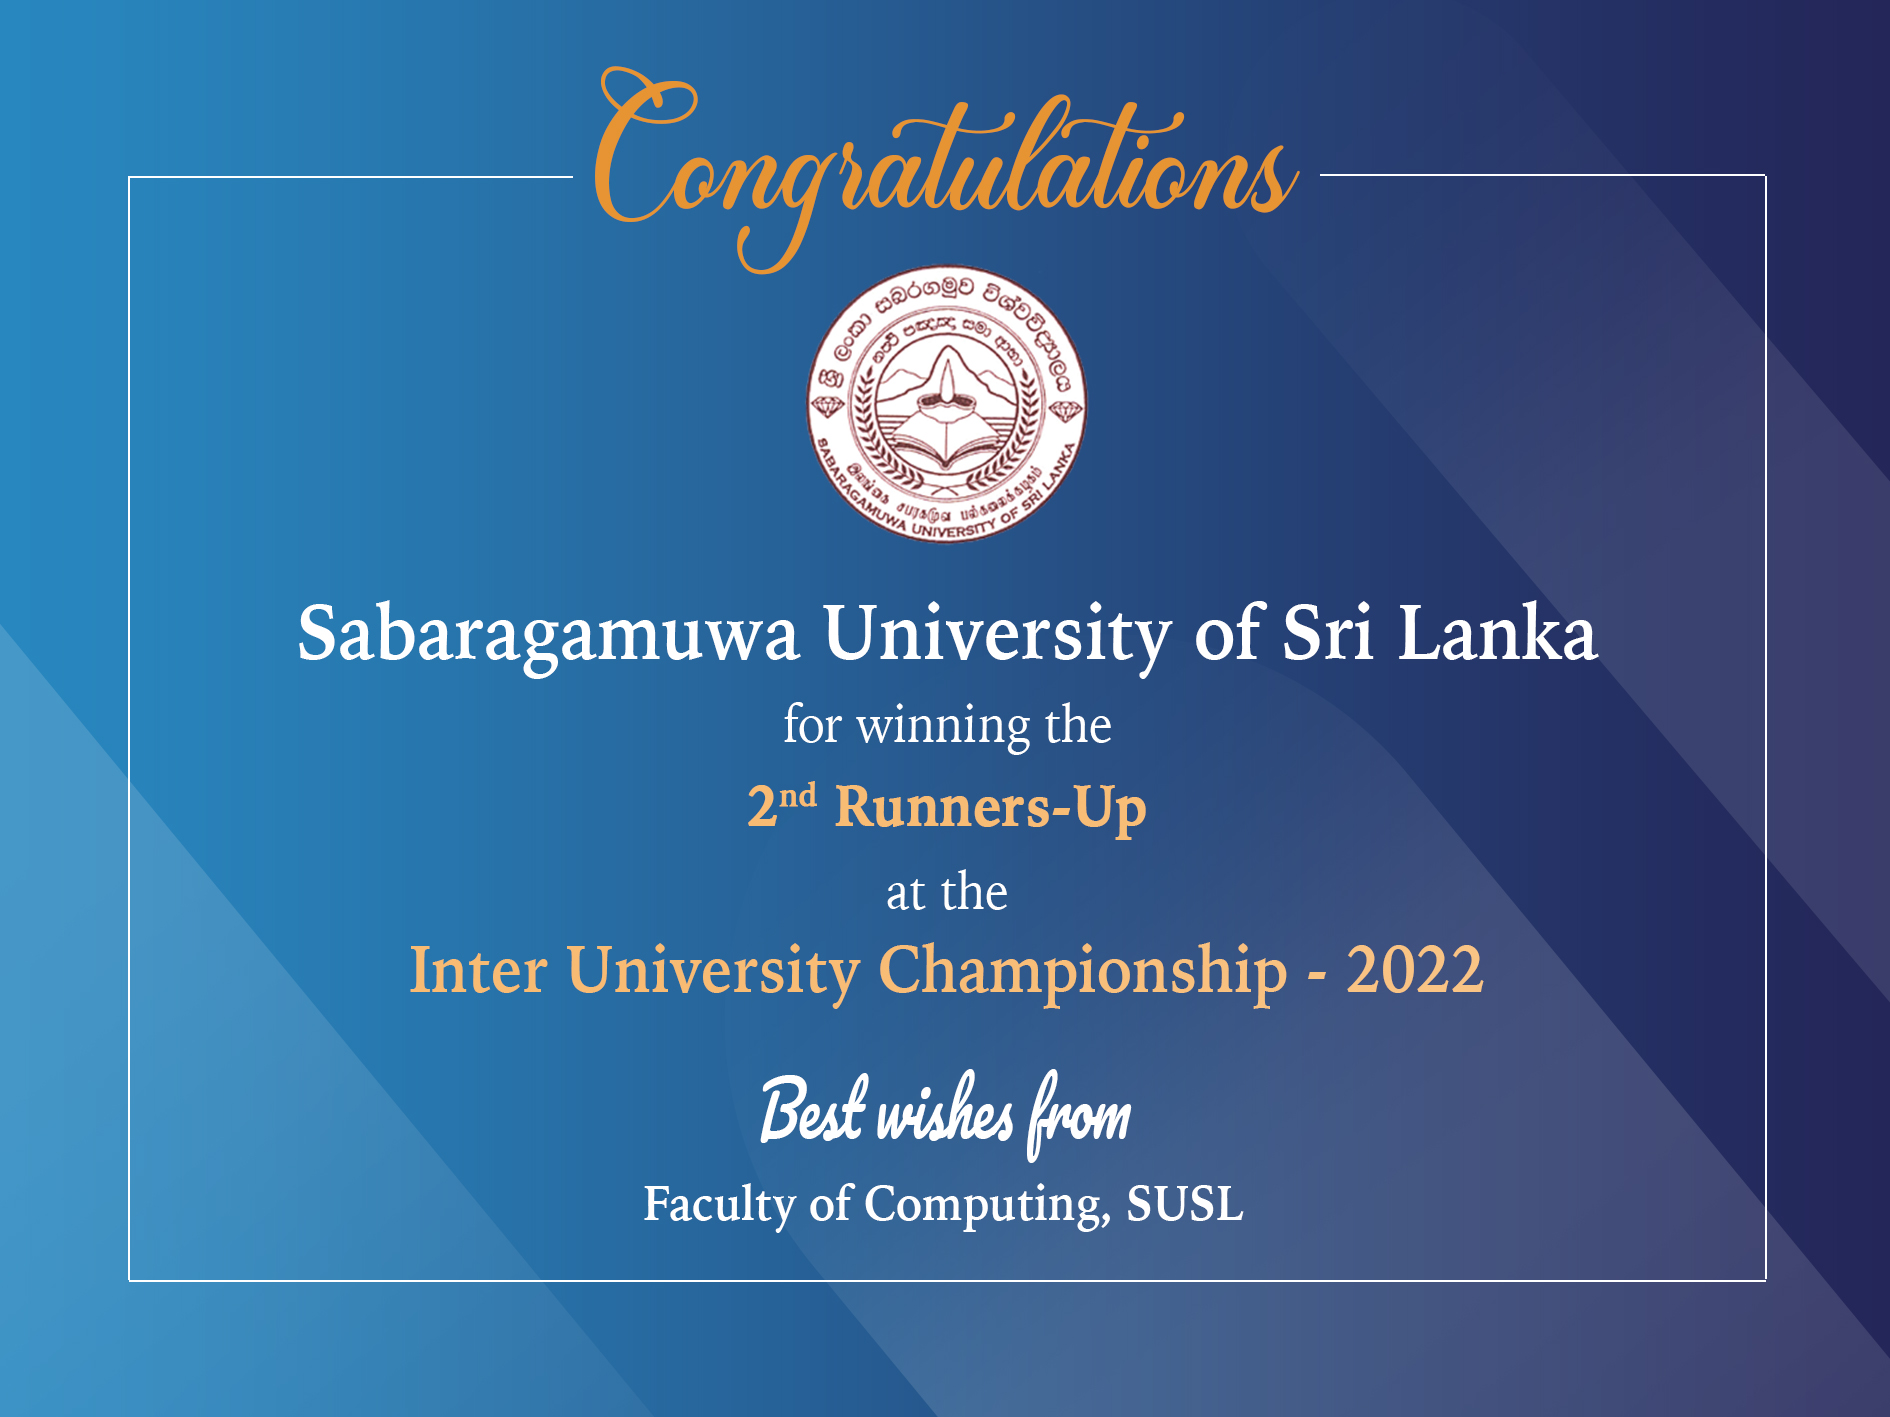 SUSL - The 2nd Runners-Up in the Inter University Championship - 2022 